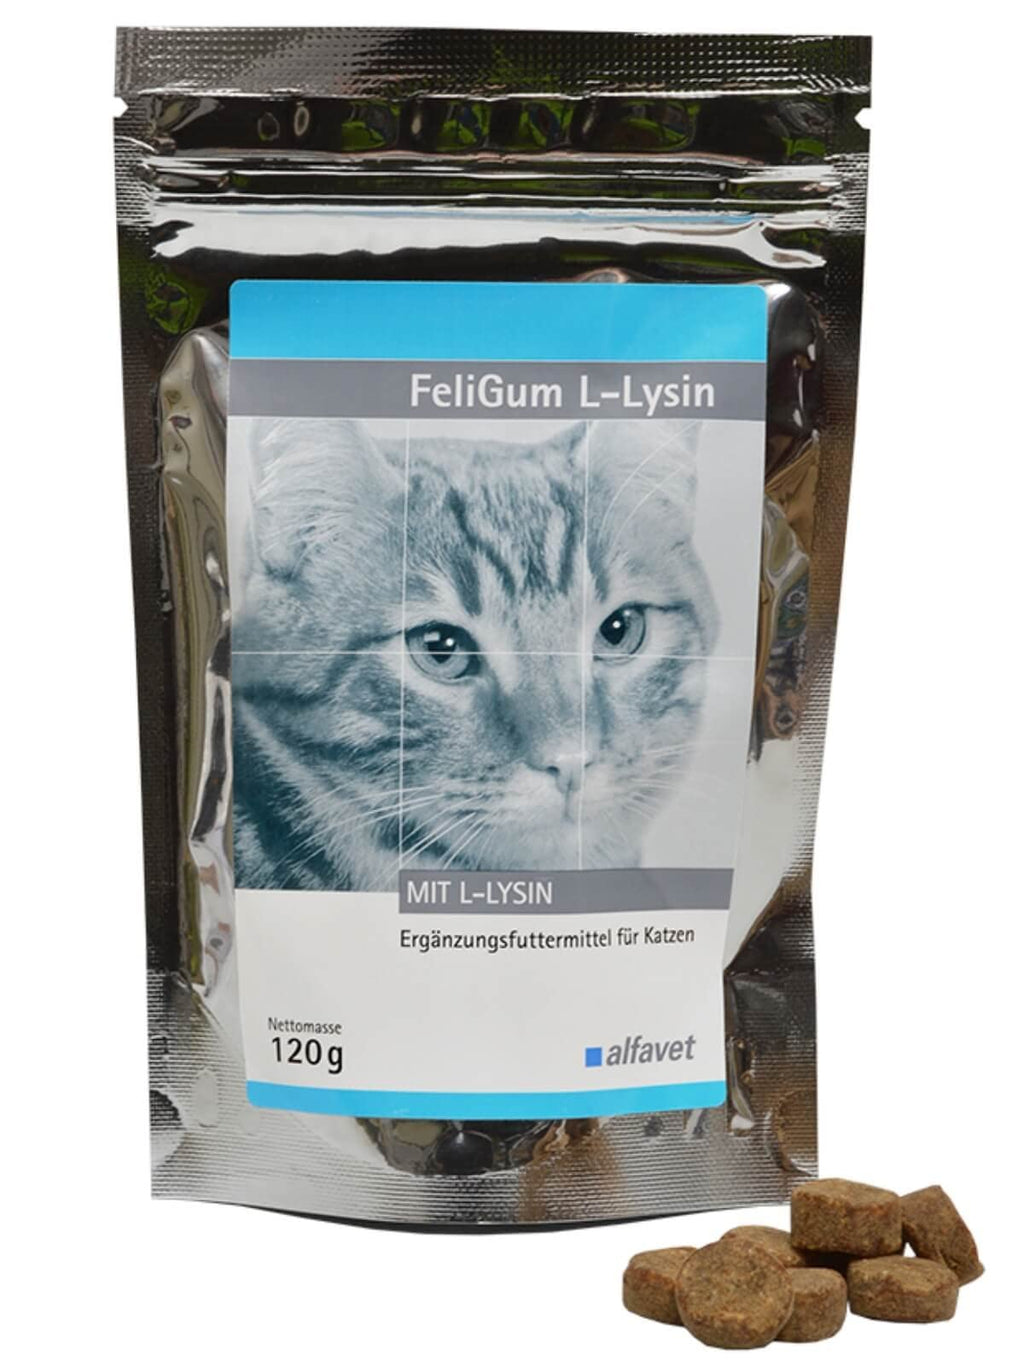 Alfavet FeliGum L-Lysine for cat colds, supplementary food for cats, 120 g bag, approx. 60 chewing drops - PawsPlanet Australia